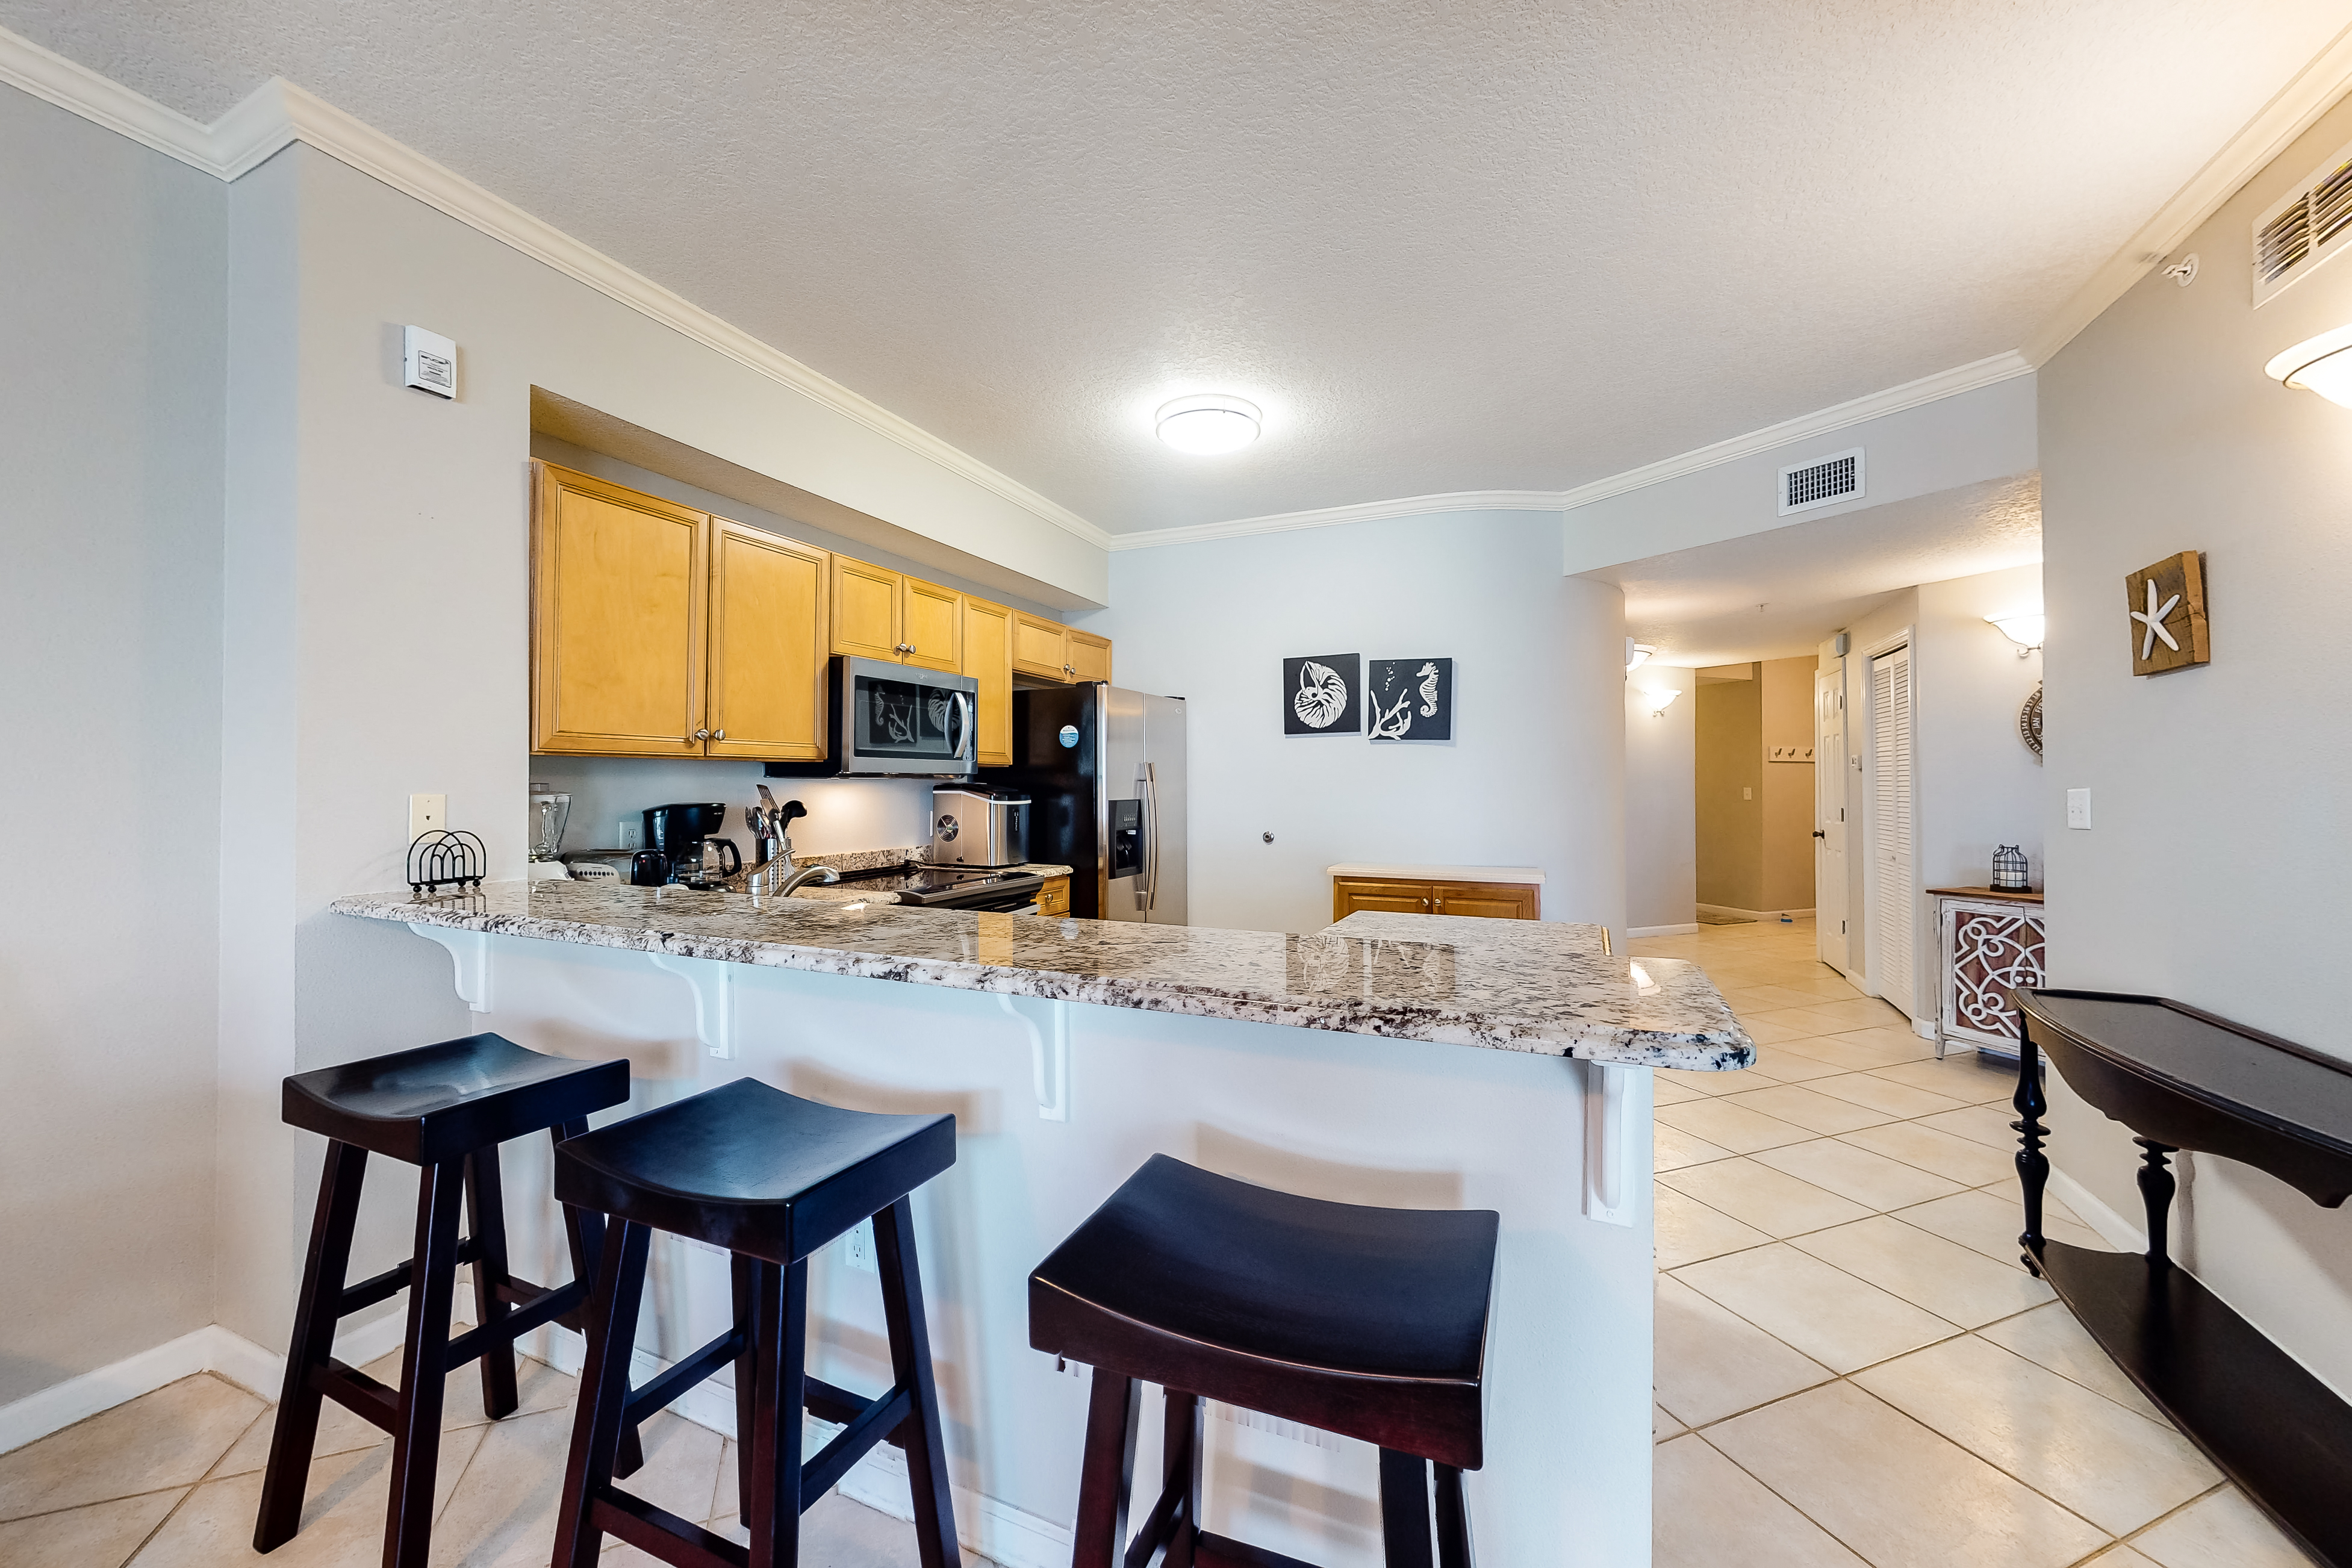 Dunes of Seagrove A104 Condo rental in Dunes of Seagrove in Highway 30-A Florida - #6